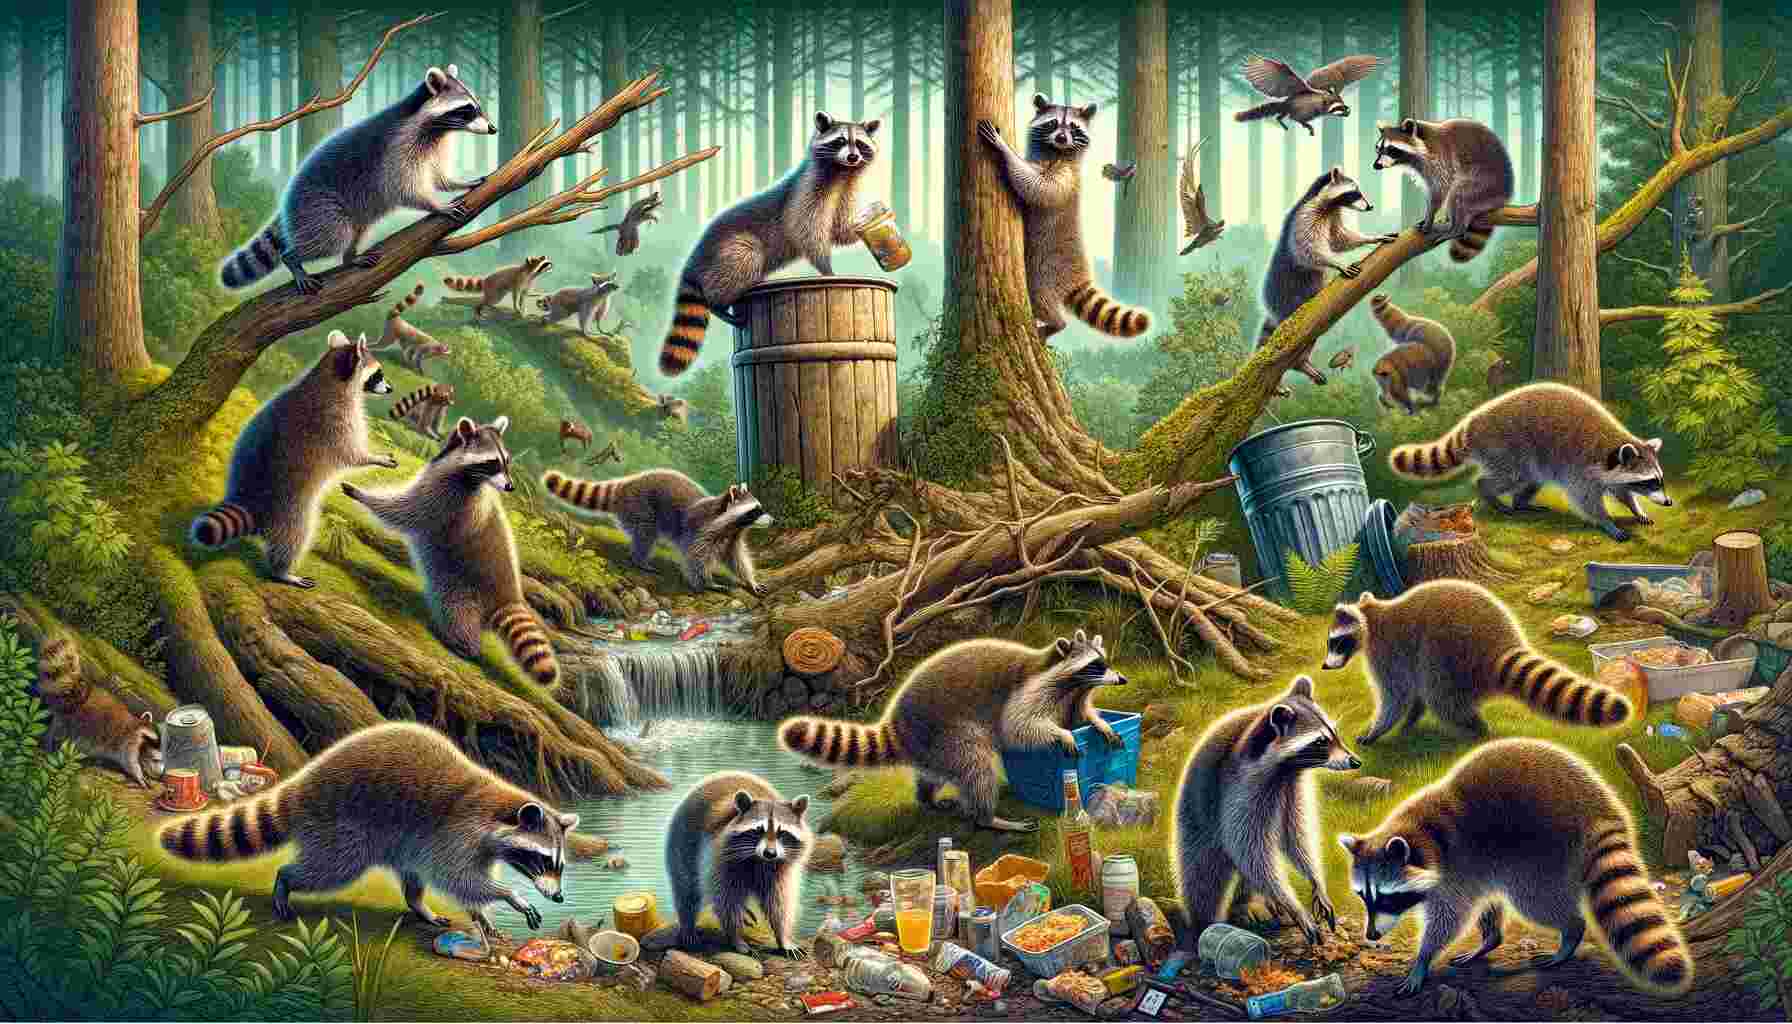 Here is the image depicting various aspects of raccoon behavior in their natural habitat. It showcases raccoons engaging in activities like foraging for food, climbing a tree, and socializing in a forest environment.